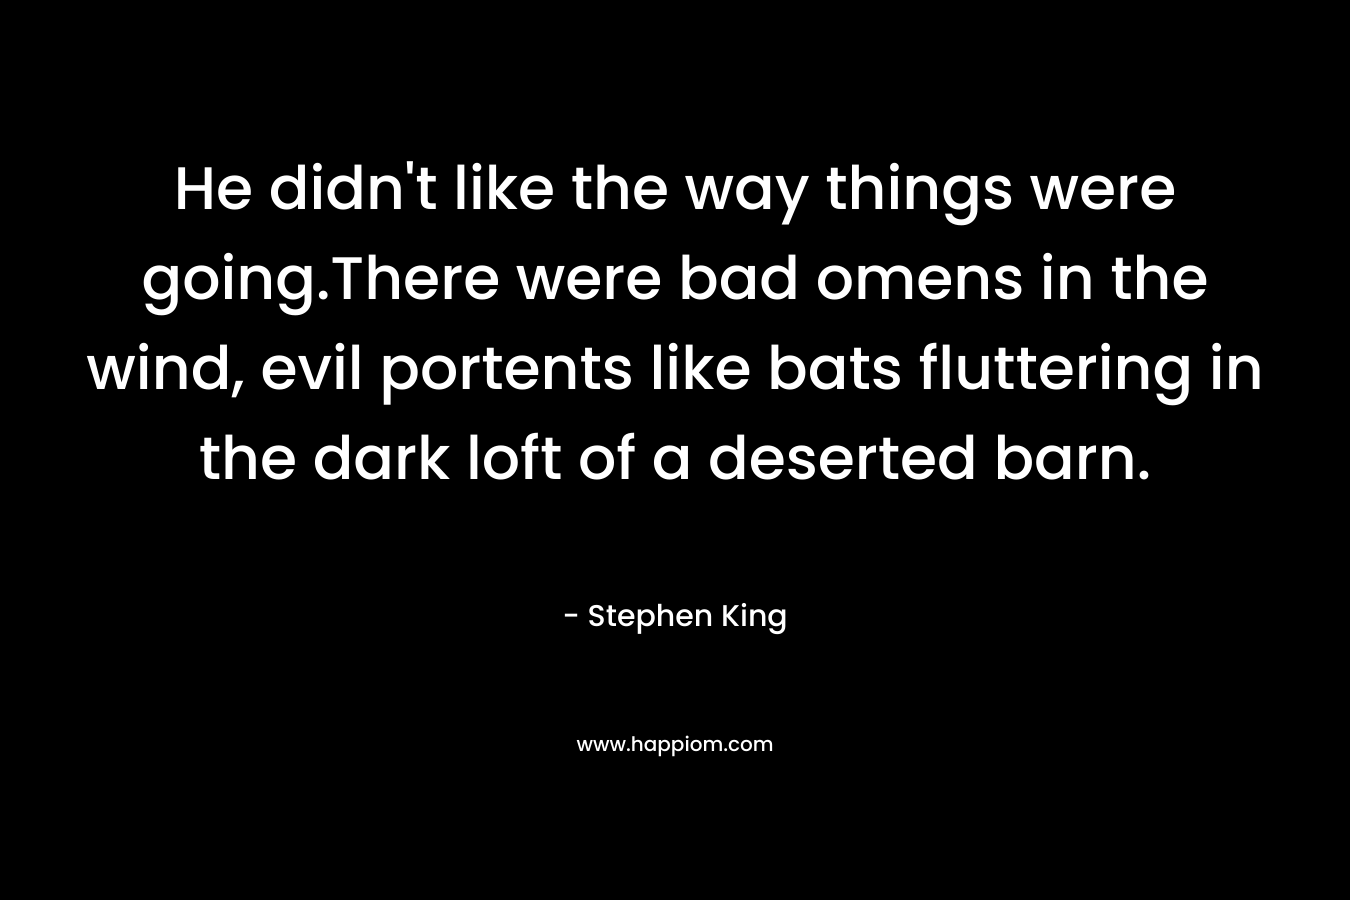 He didn’t like the way things were going.There were bad omens in the wind, evil portents like bats fluttering in the dark loft of a deserted barn. – Stephen King